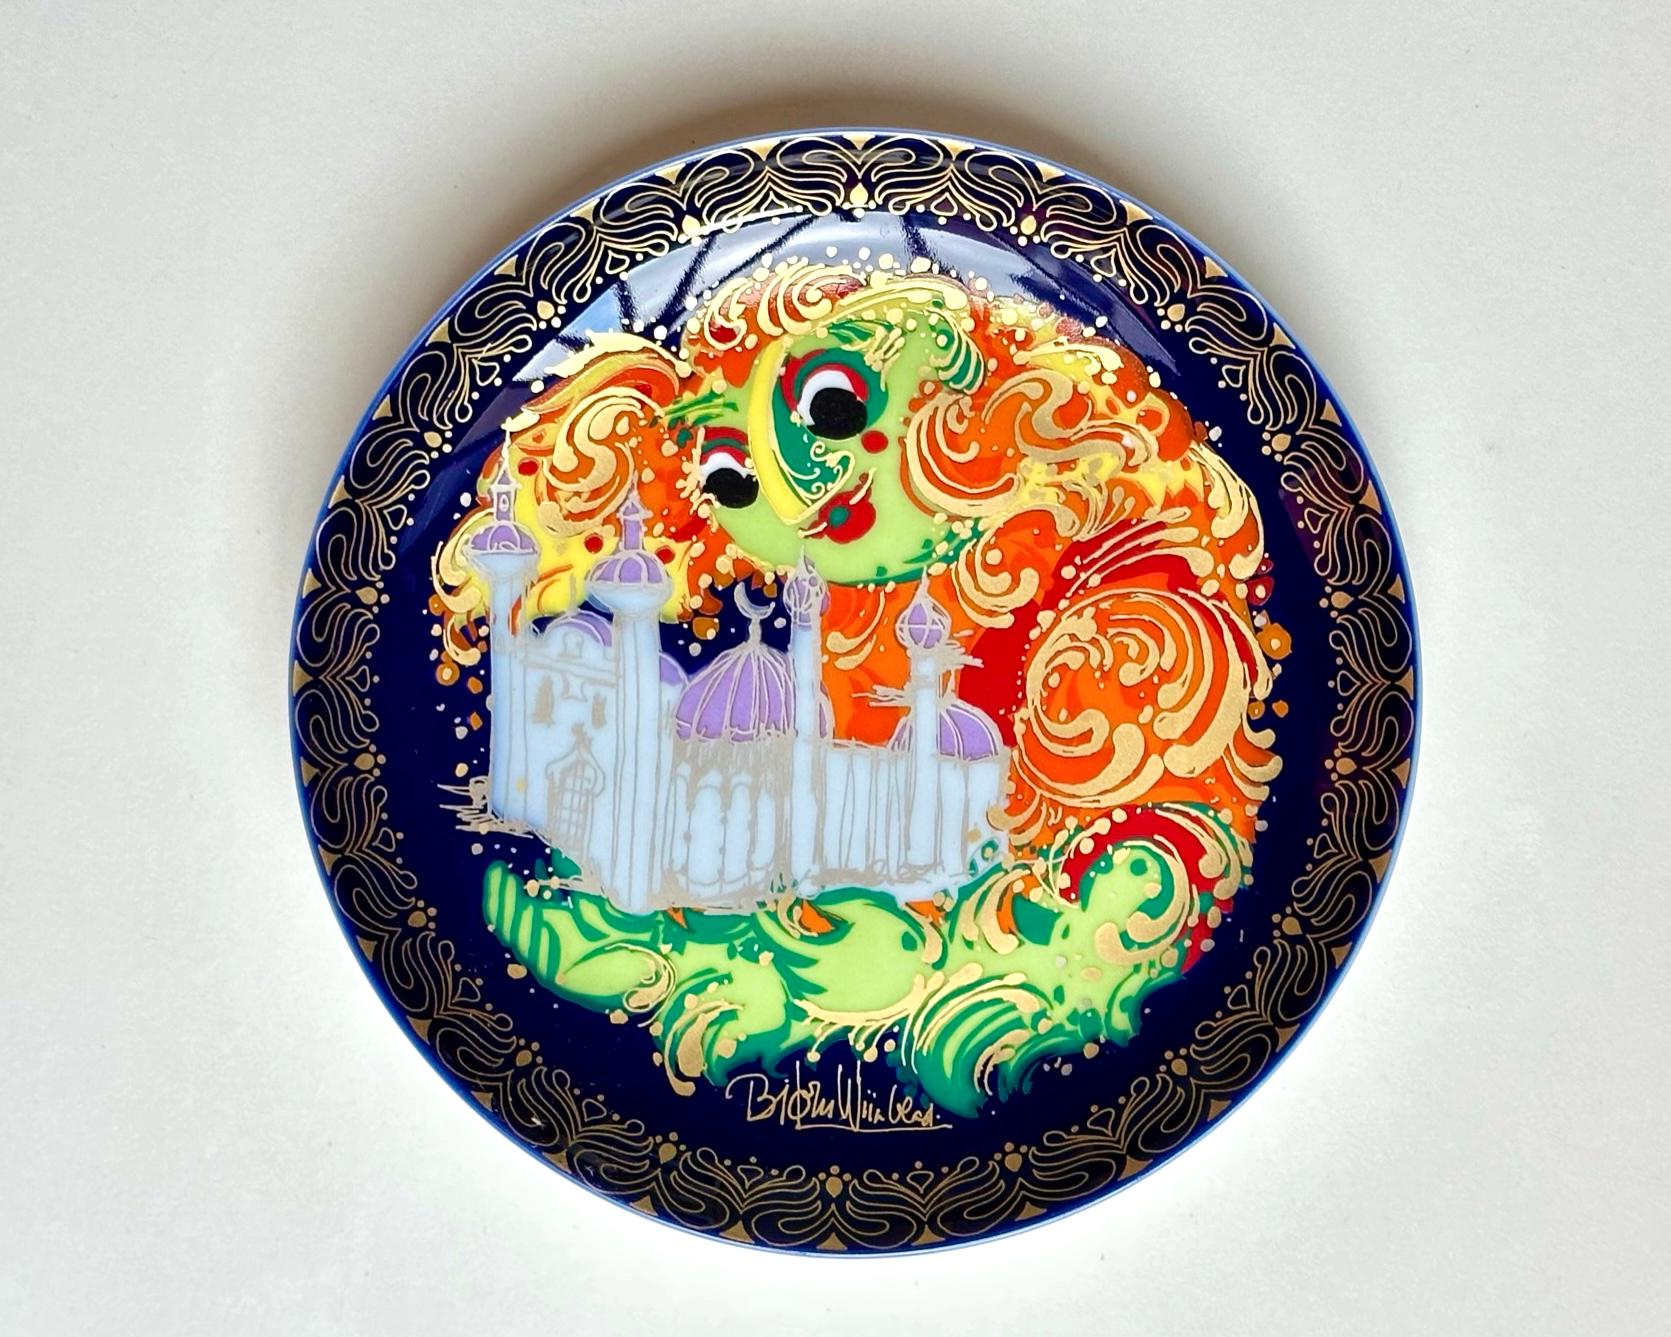 Porcelain Beautiful Collectible Plates Bjorn Wiinblad, Rosenthal, Germany, 1970s For Sale